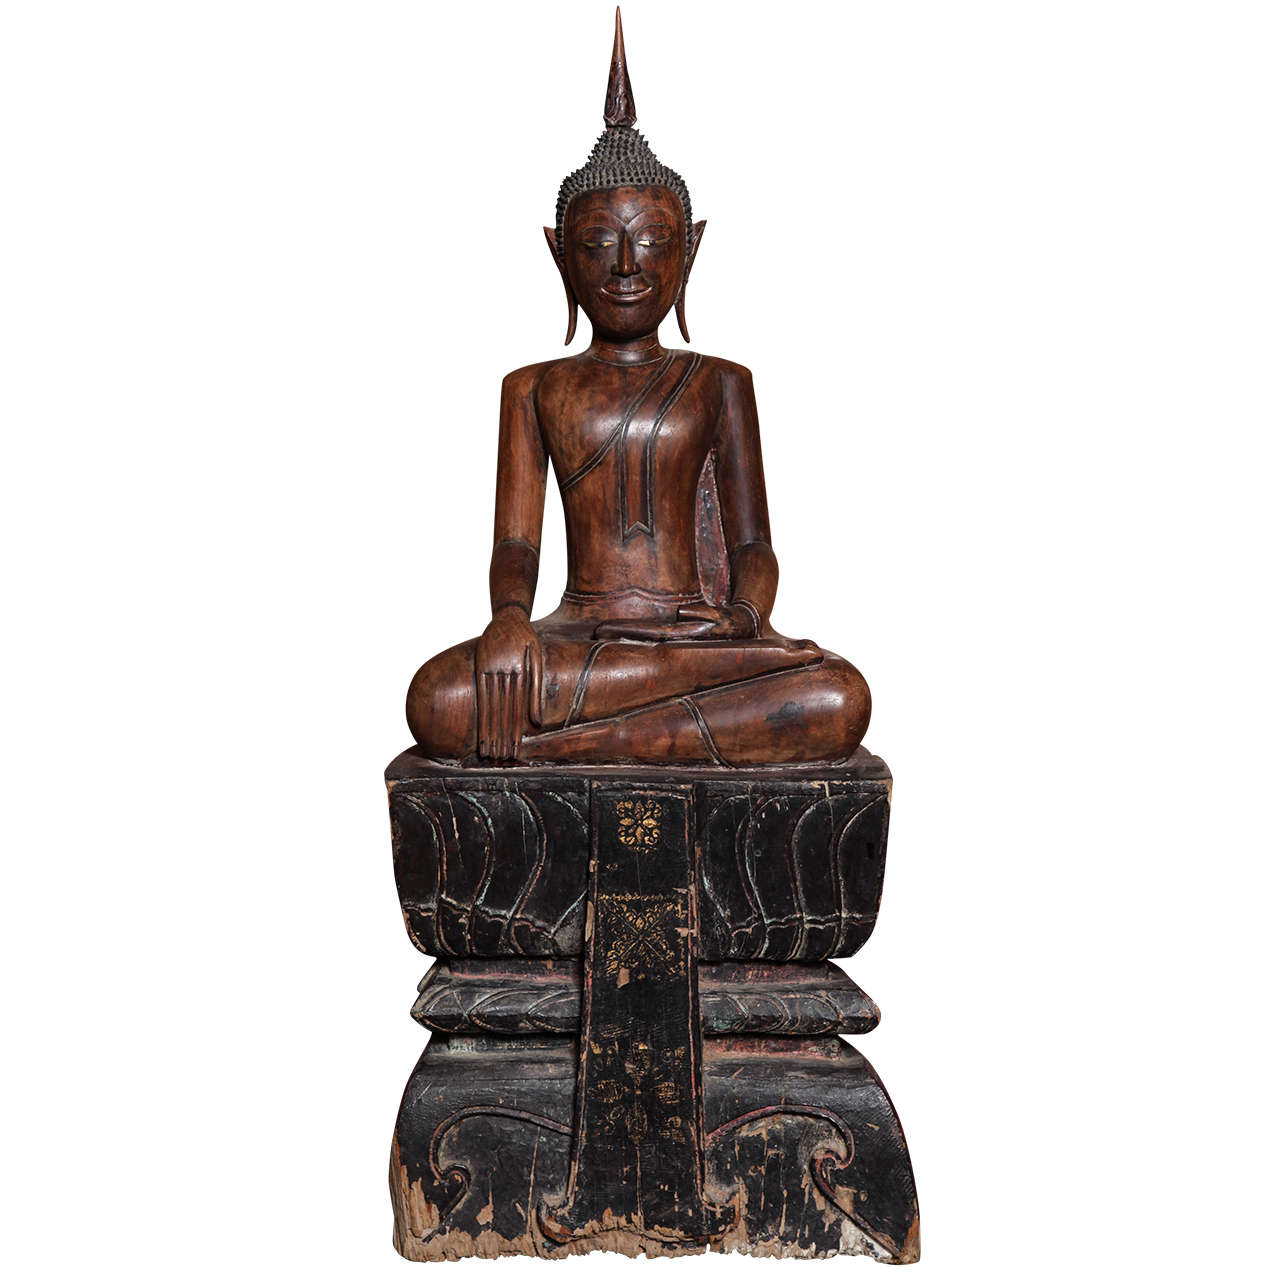 Antique Painted Teak Seated Buddha from Thailand, 17th-18th Century